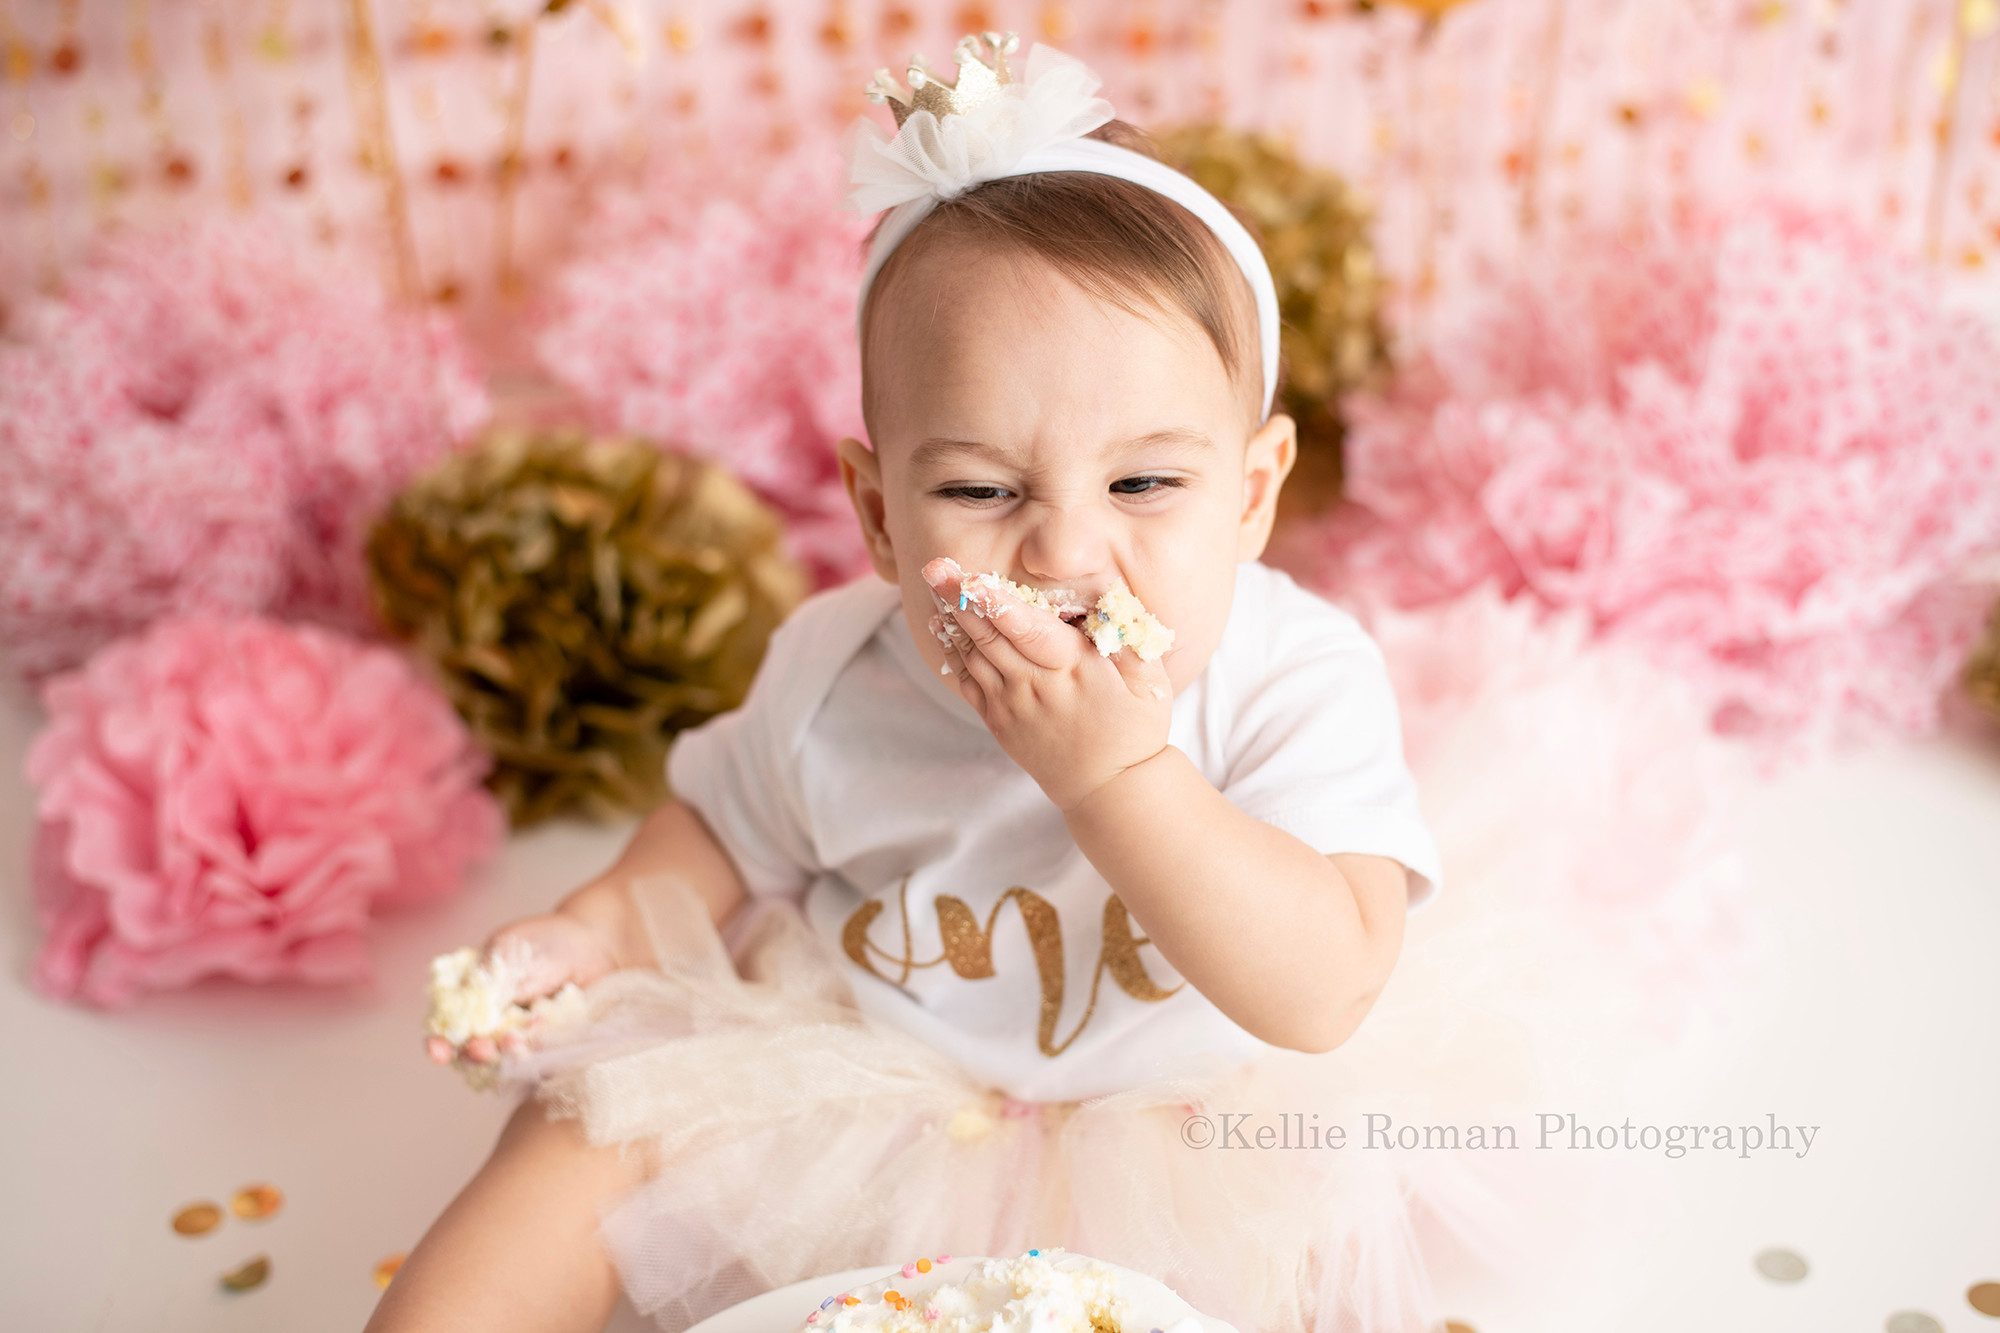 dig in a one year old girl from waukesha in a Milwaukee photography studio smashing cake into her mouth for her one year old milestone photography session. The colors of the session are pink and gold